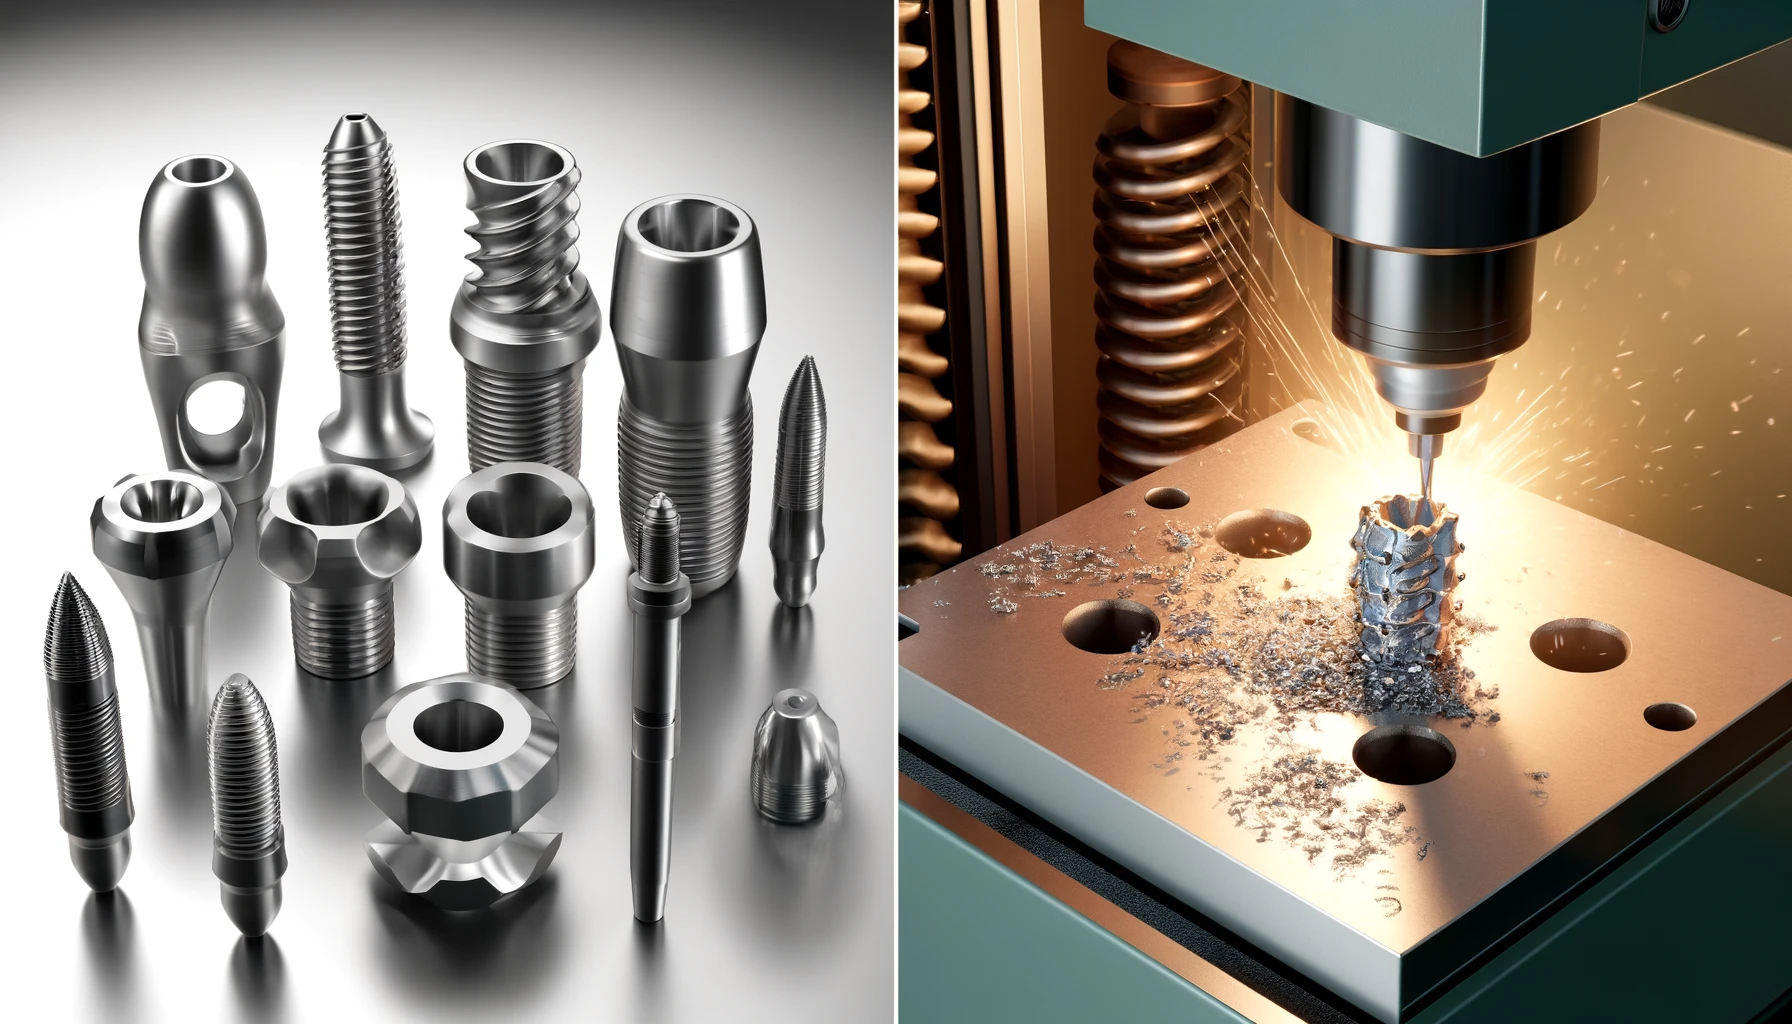 CNC Machining Parts Used in Dental Implants